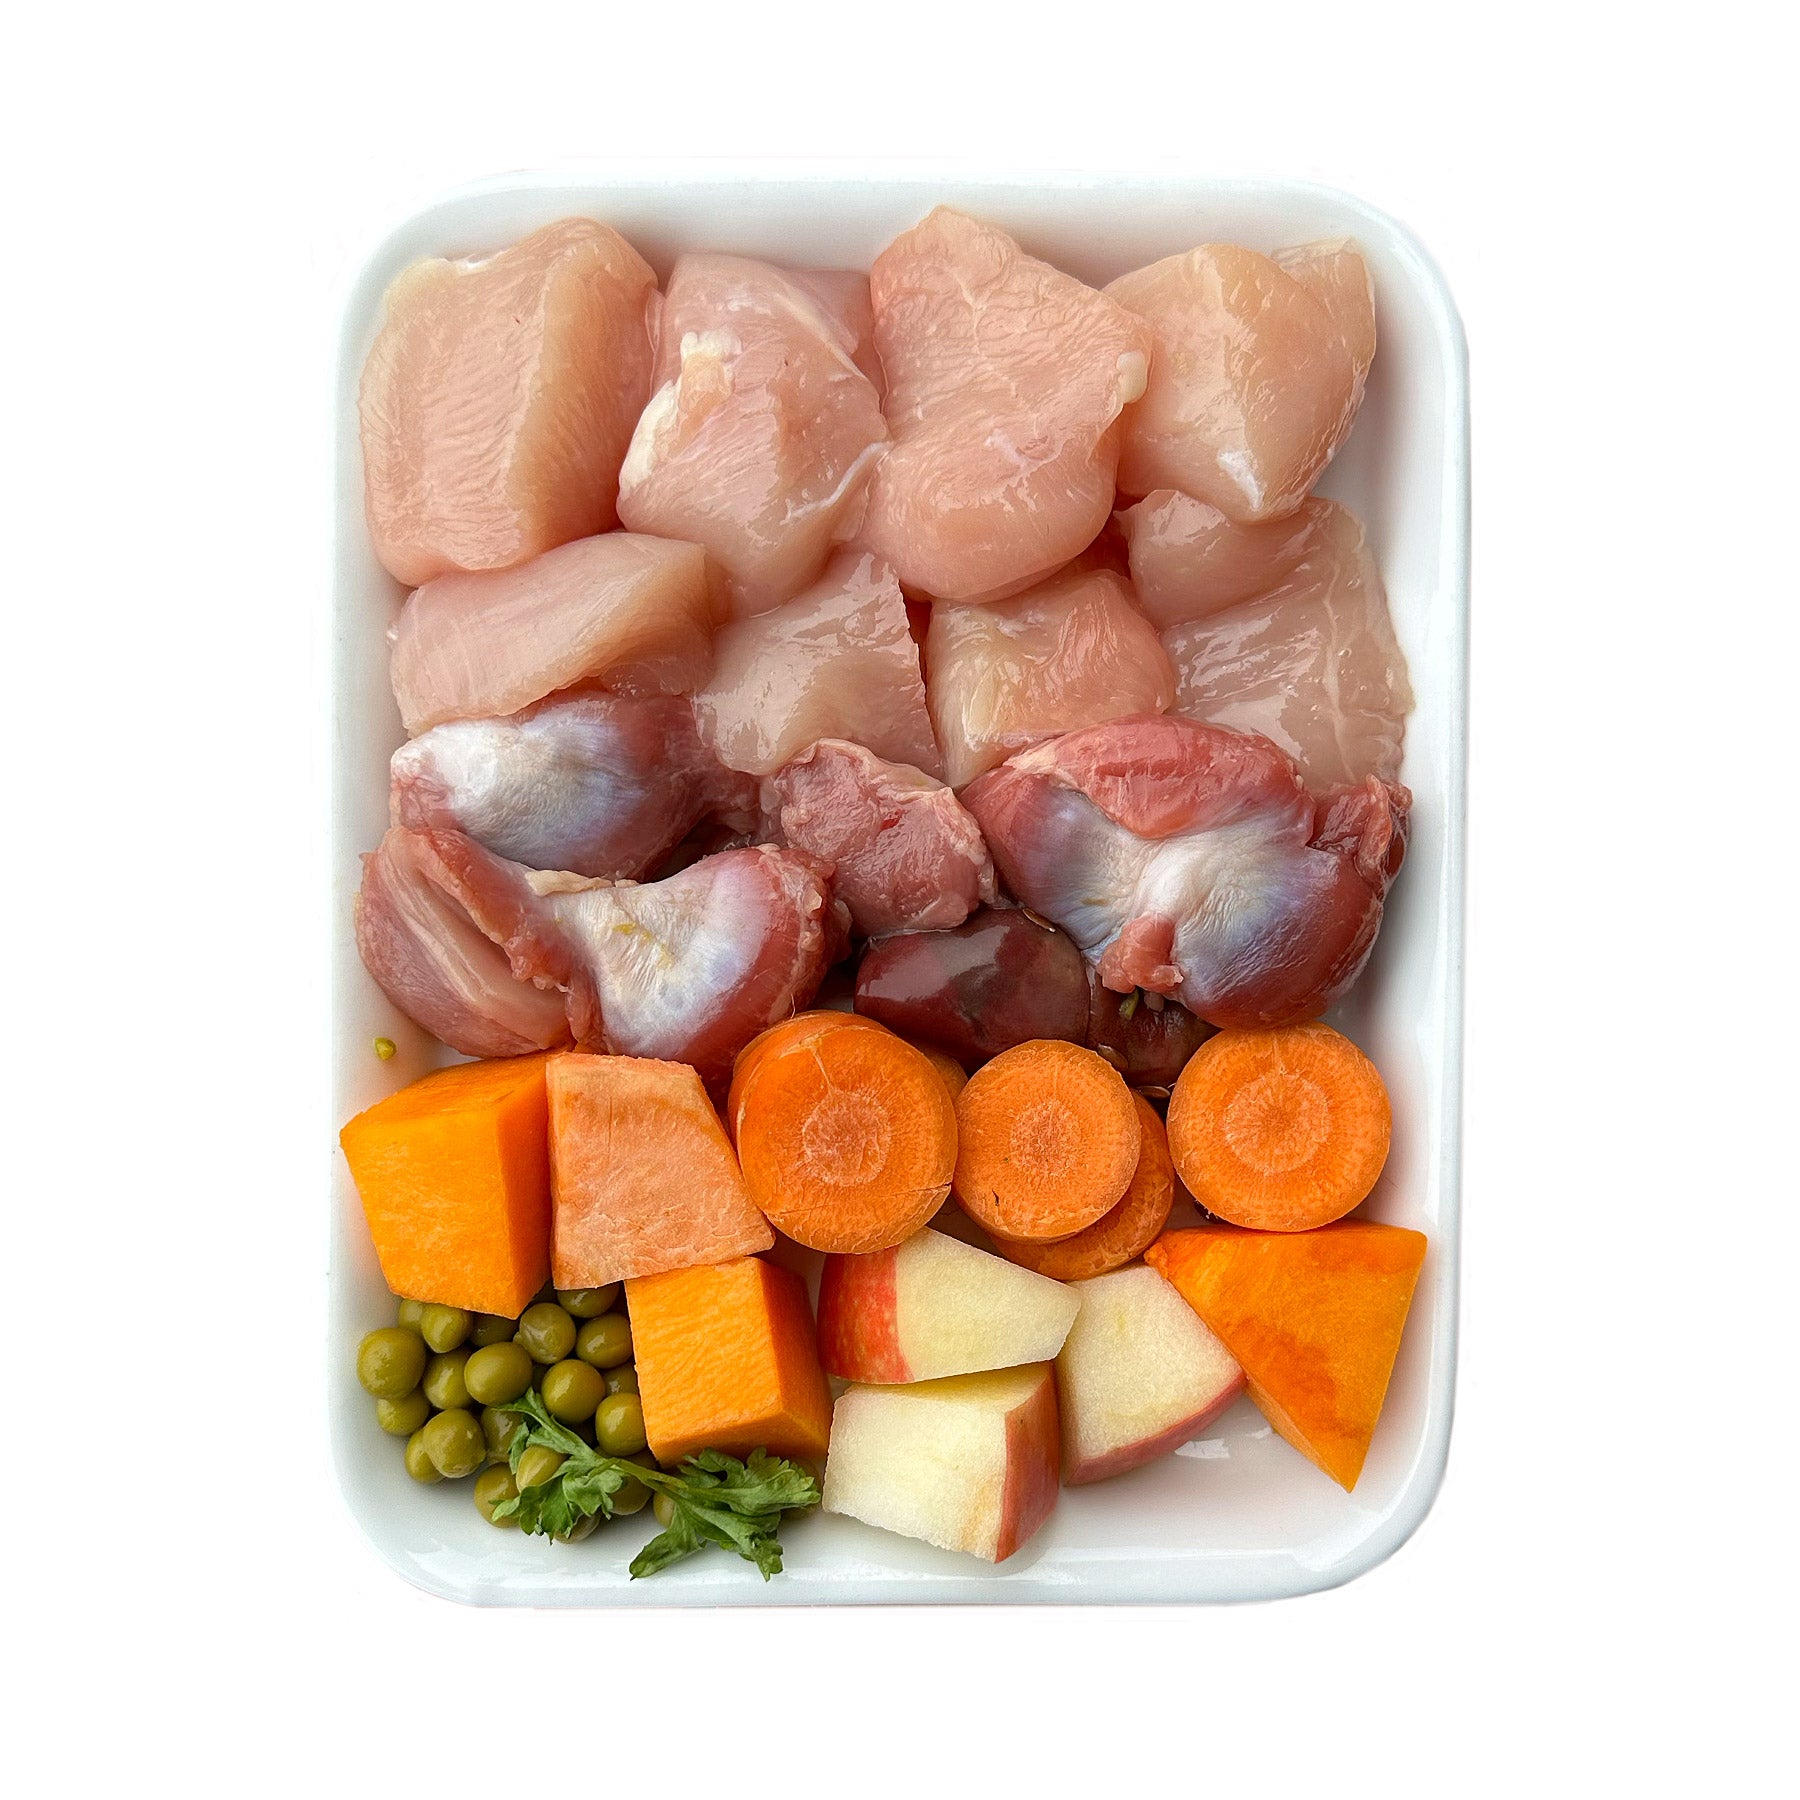 Cooked Chicken Menu with Sweet Potatoes by Fidelis (500g)